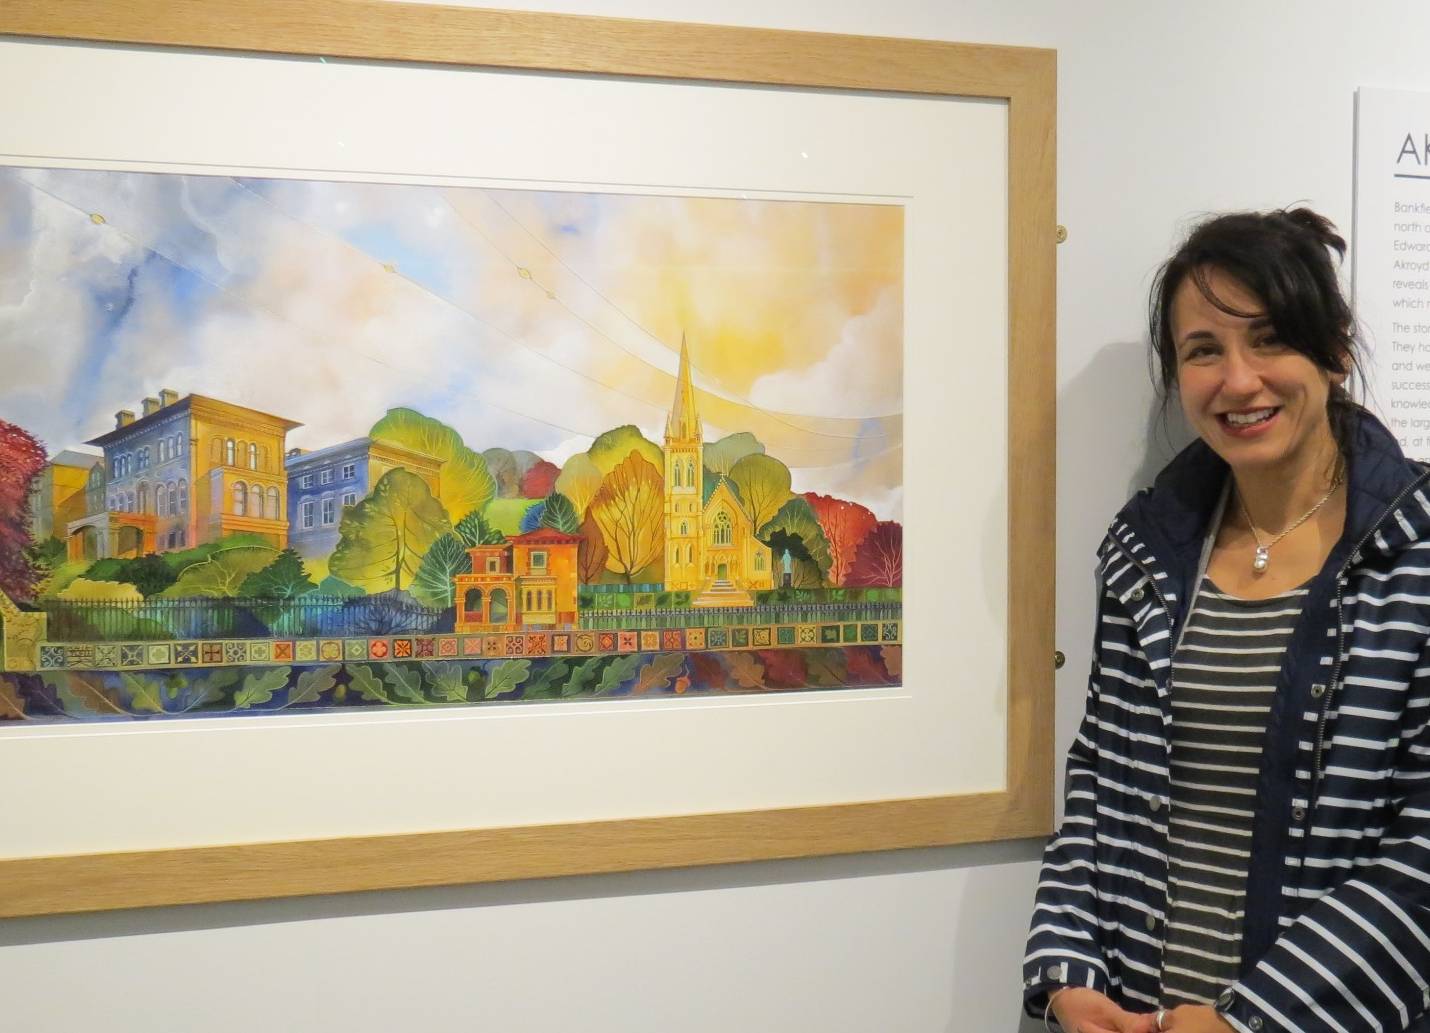 møde jævnt snemand New painting puts Bankfield in the frame | News Centre - Official news site  of Calderdale Council